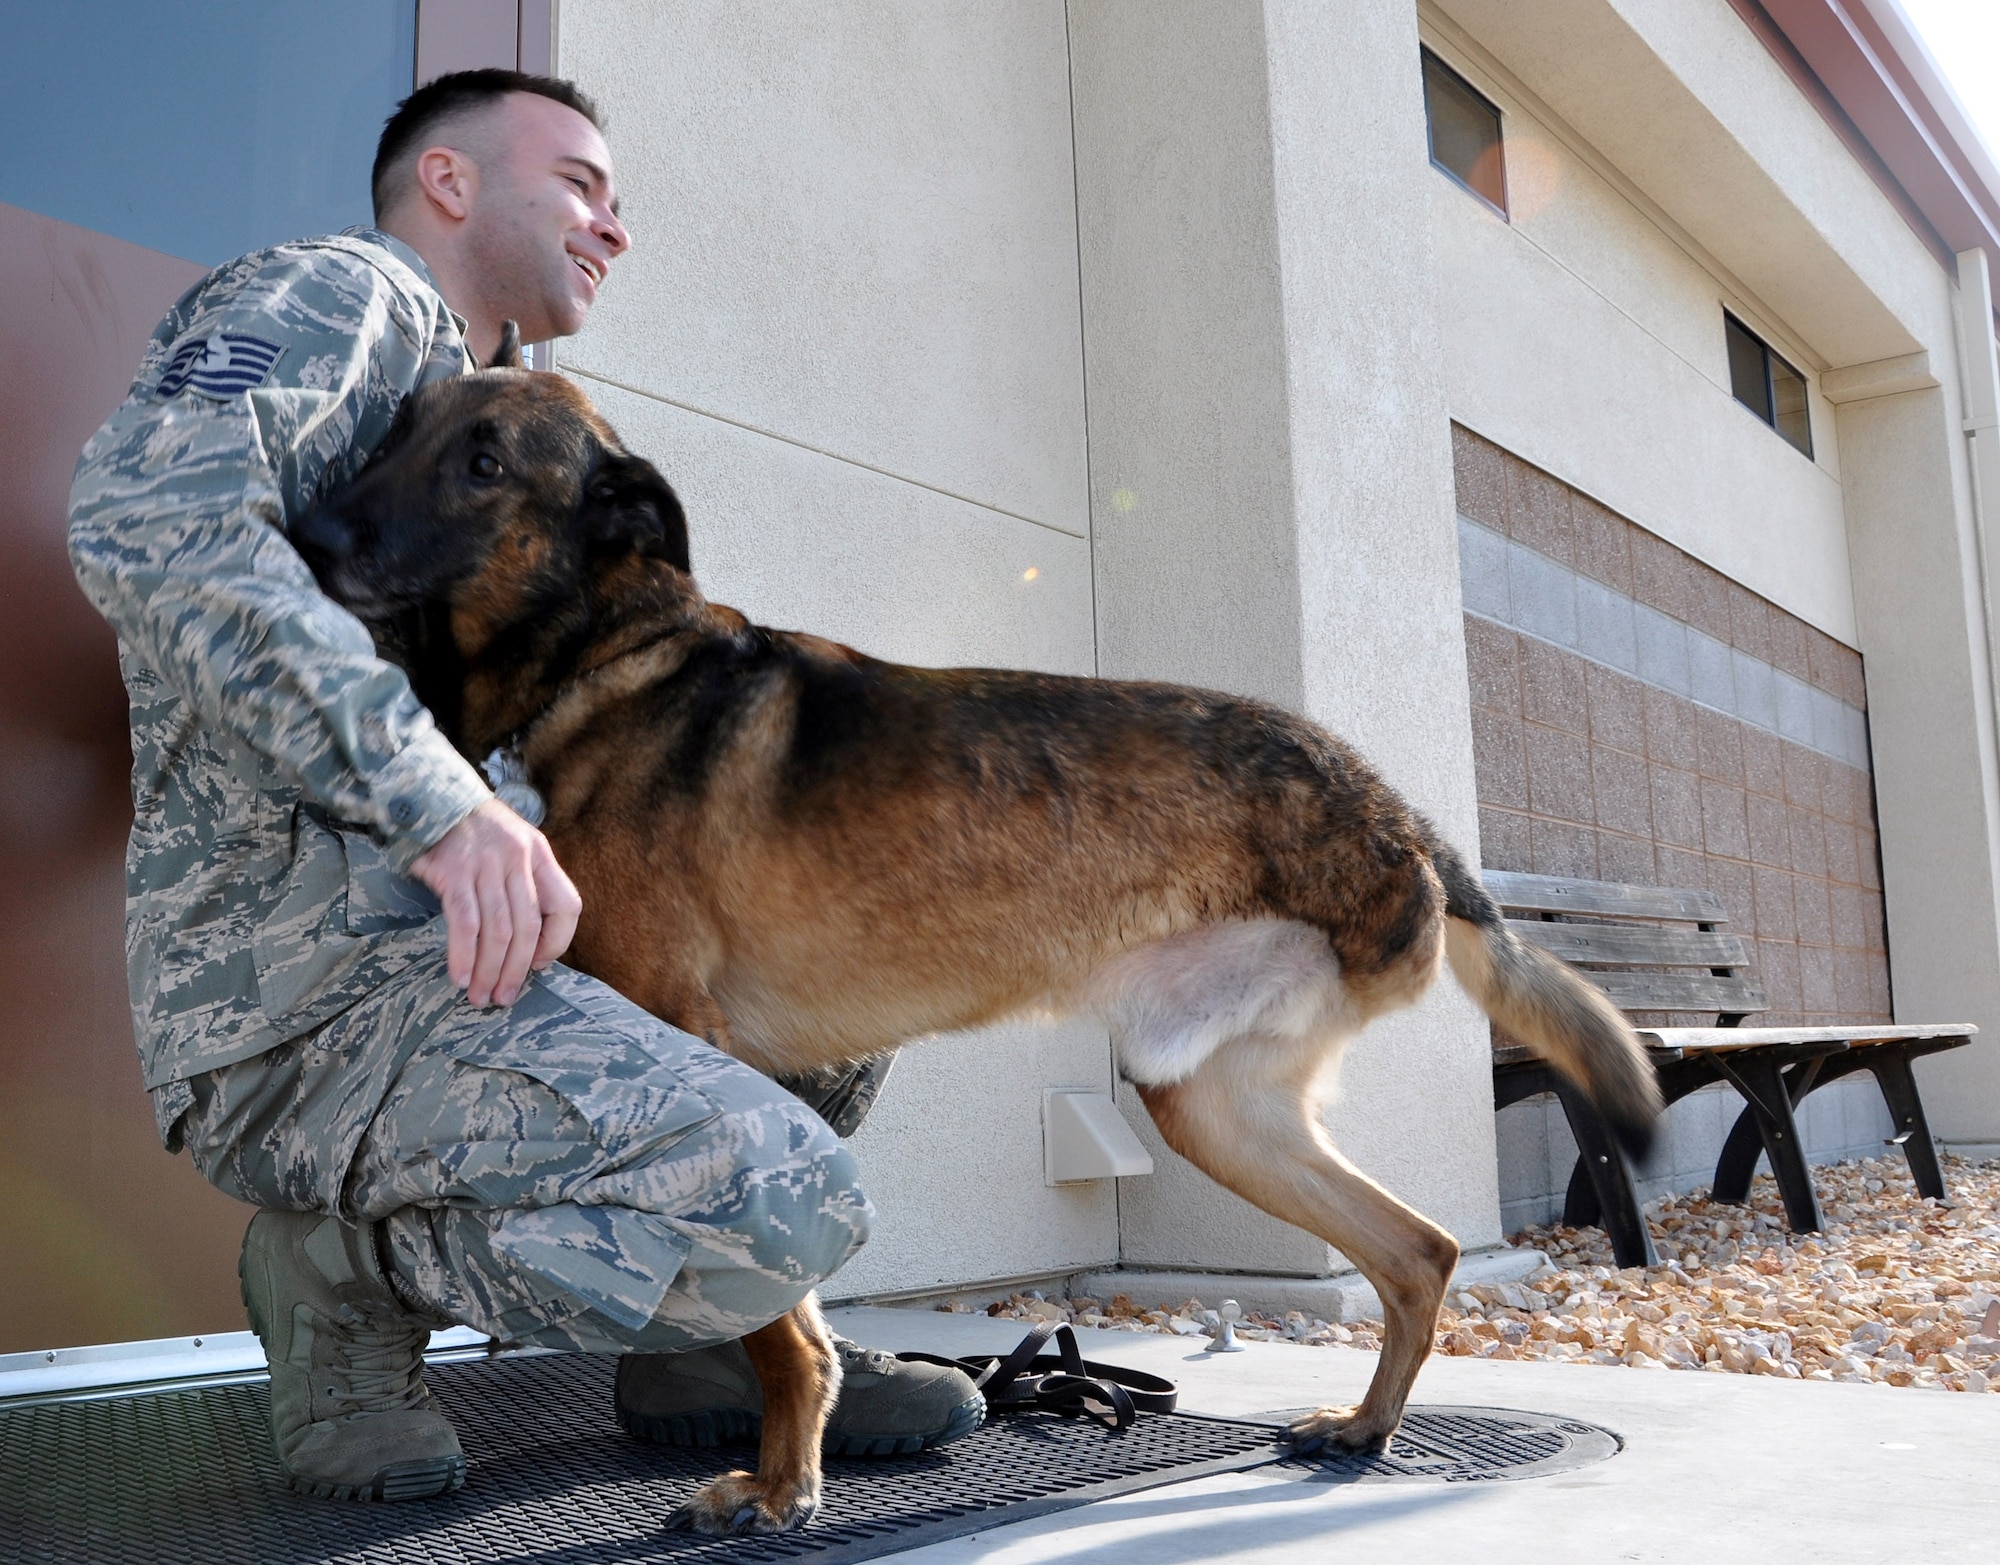 Pepper, a 9-year-old retired Military Working Dog, stands on alert with his owner, Tech. Sgt. Chris Smith at Travis Air Force Base, Calif. Pepper retired after a training injury resulted in a leg amputation. Smith was his handler at the time and adopted Pepper after the surgery. Smith is a kennel master assigned to the 60th Security Forces Squadron. (U.S. Air Force photo/Senior Airman Madelyn Brown)